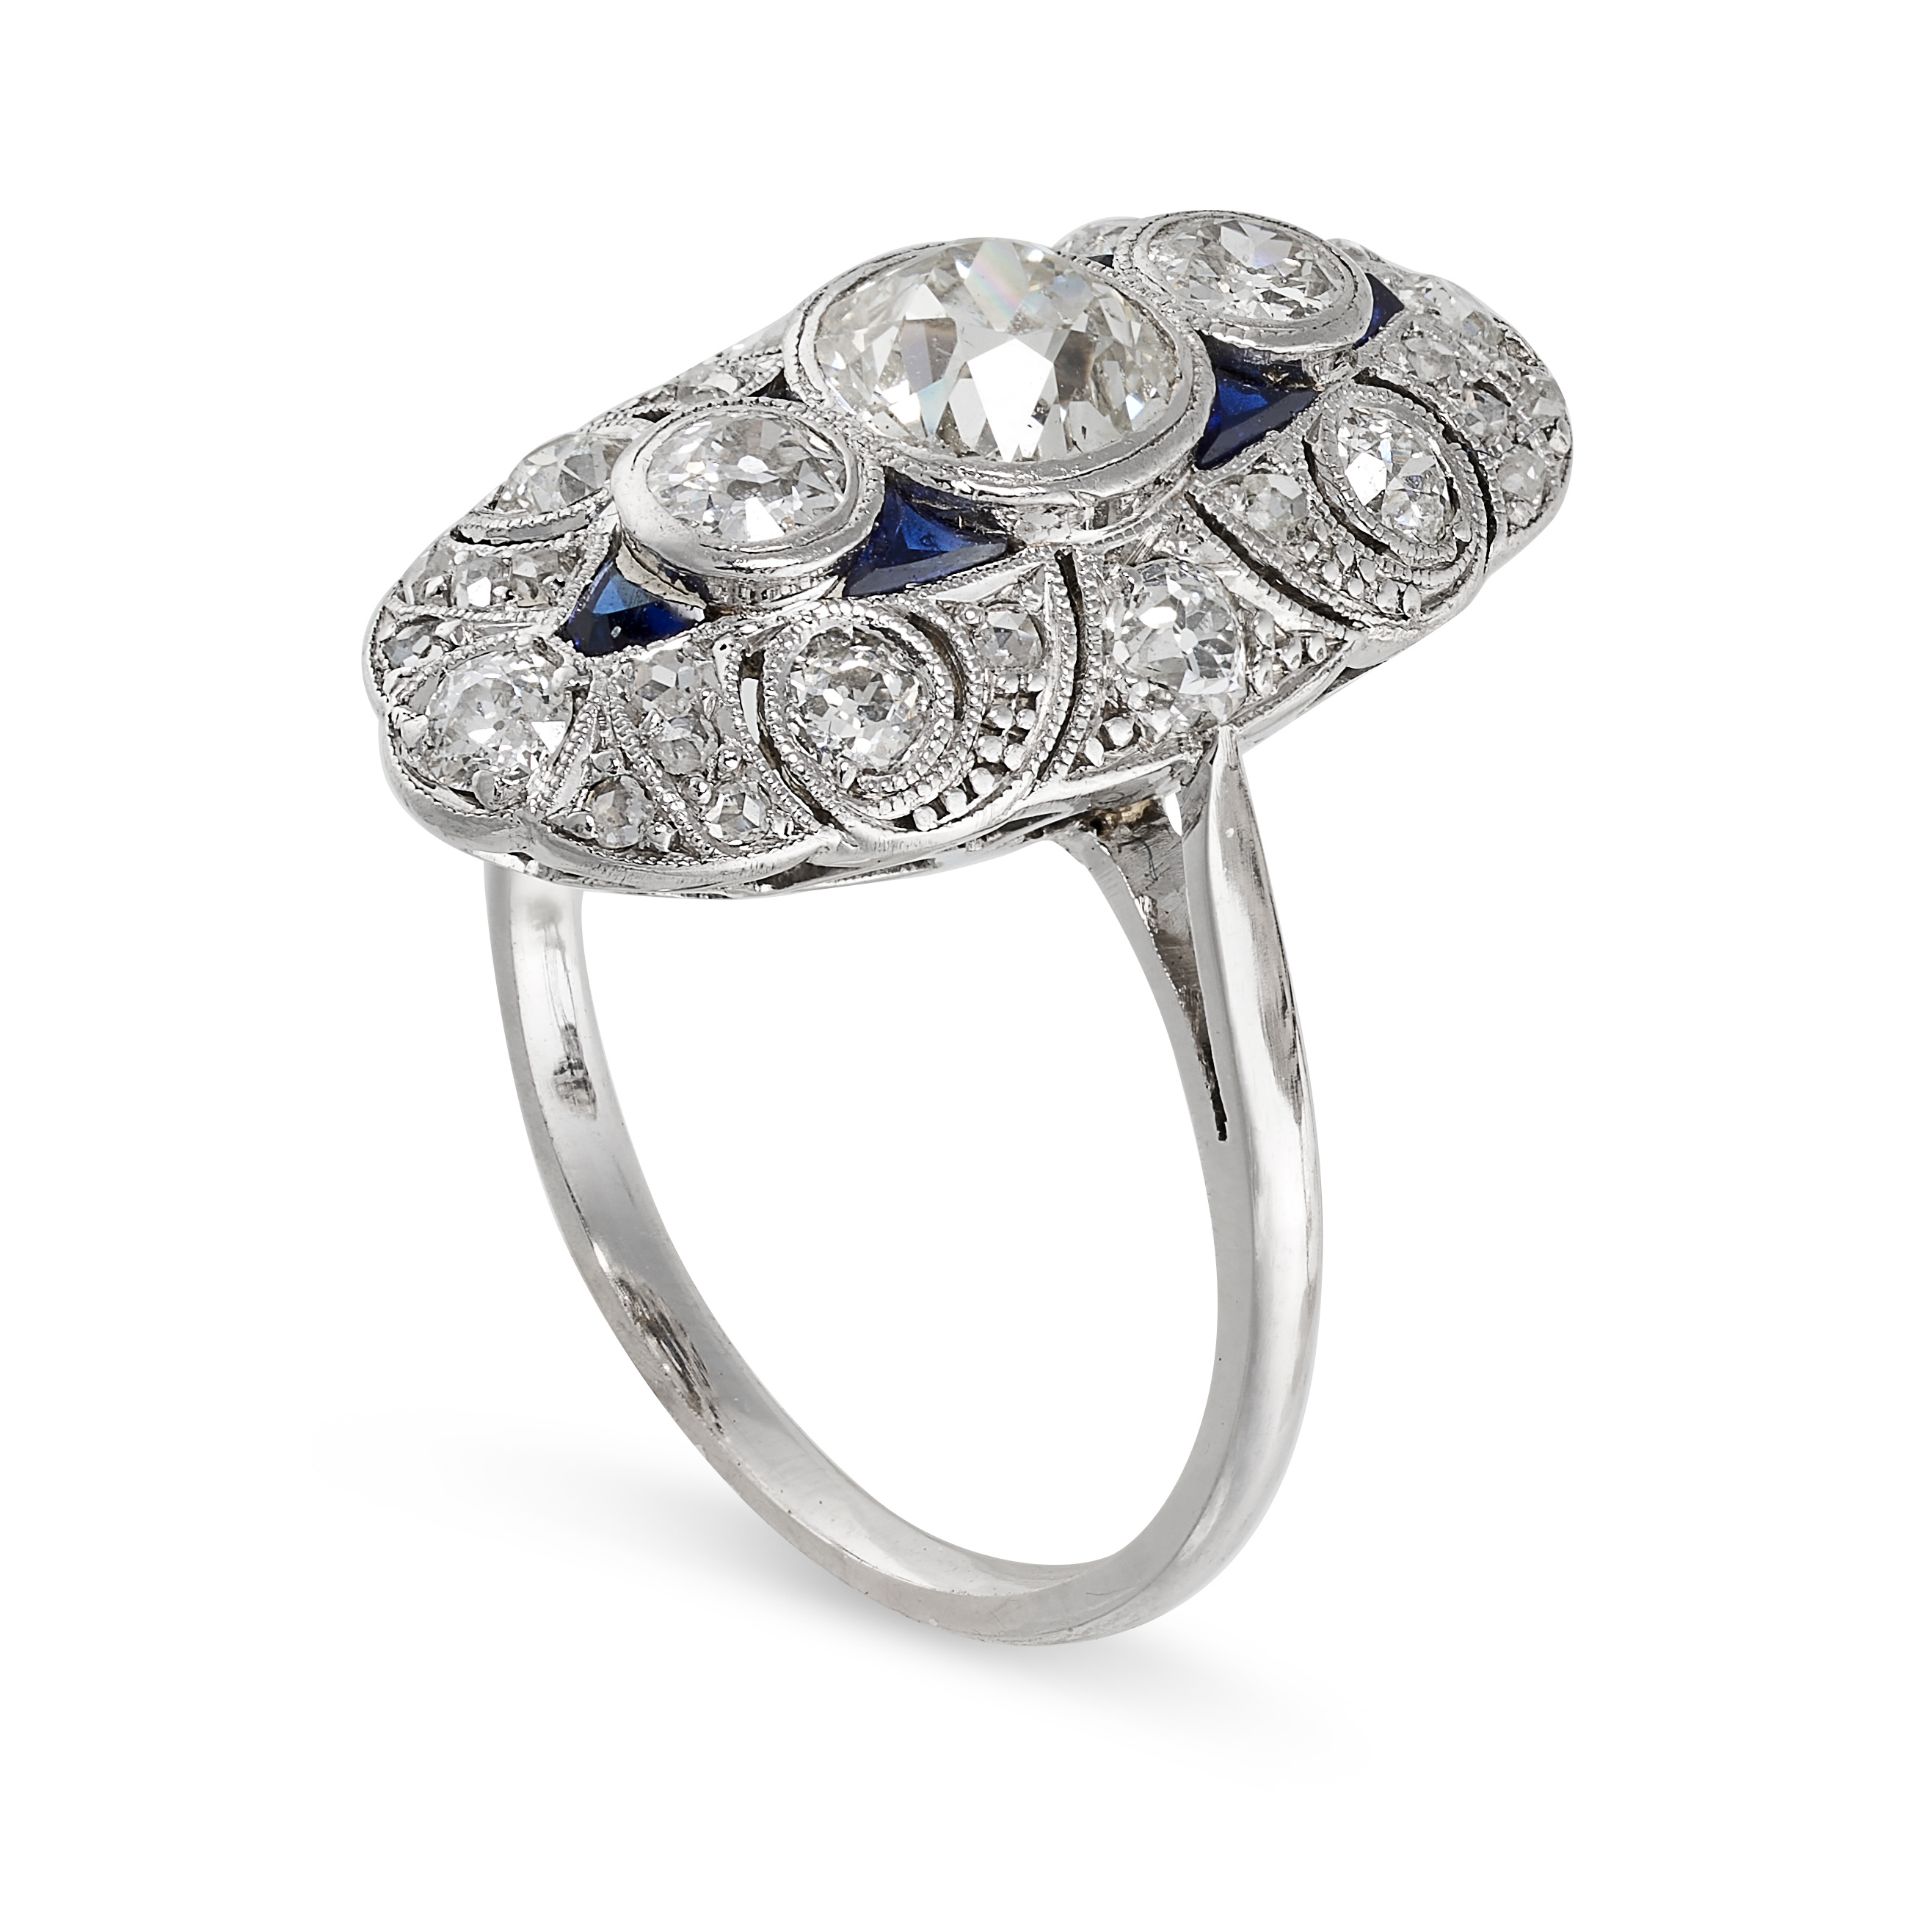 AN ART DECO DIAMOND AND SAPPHIRE RING, EARLY 20TH CENTURY Cushion-shaped and rose-cut diamonds, - Image 2 of 2